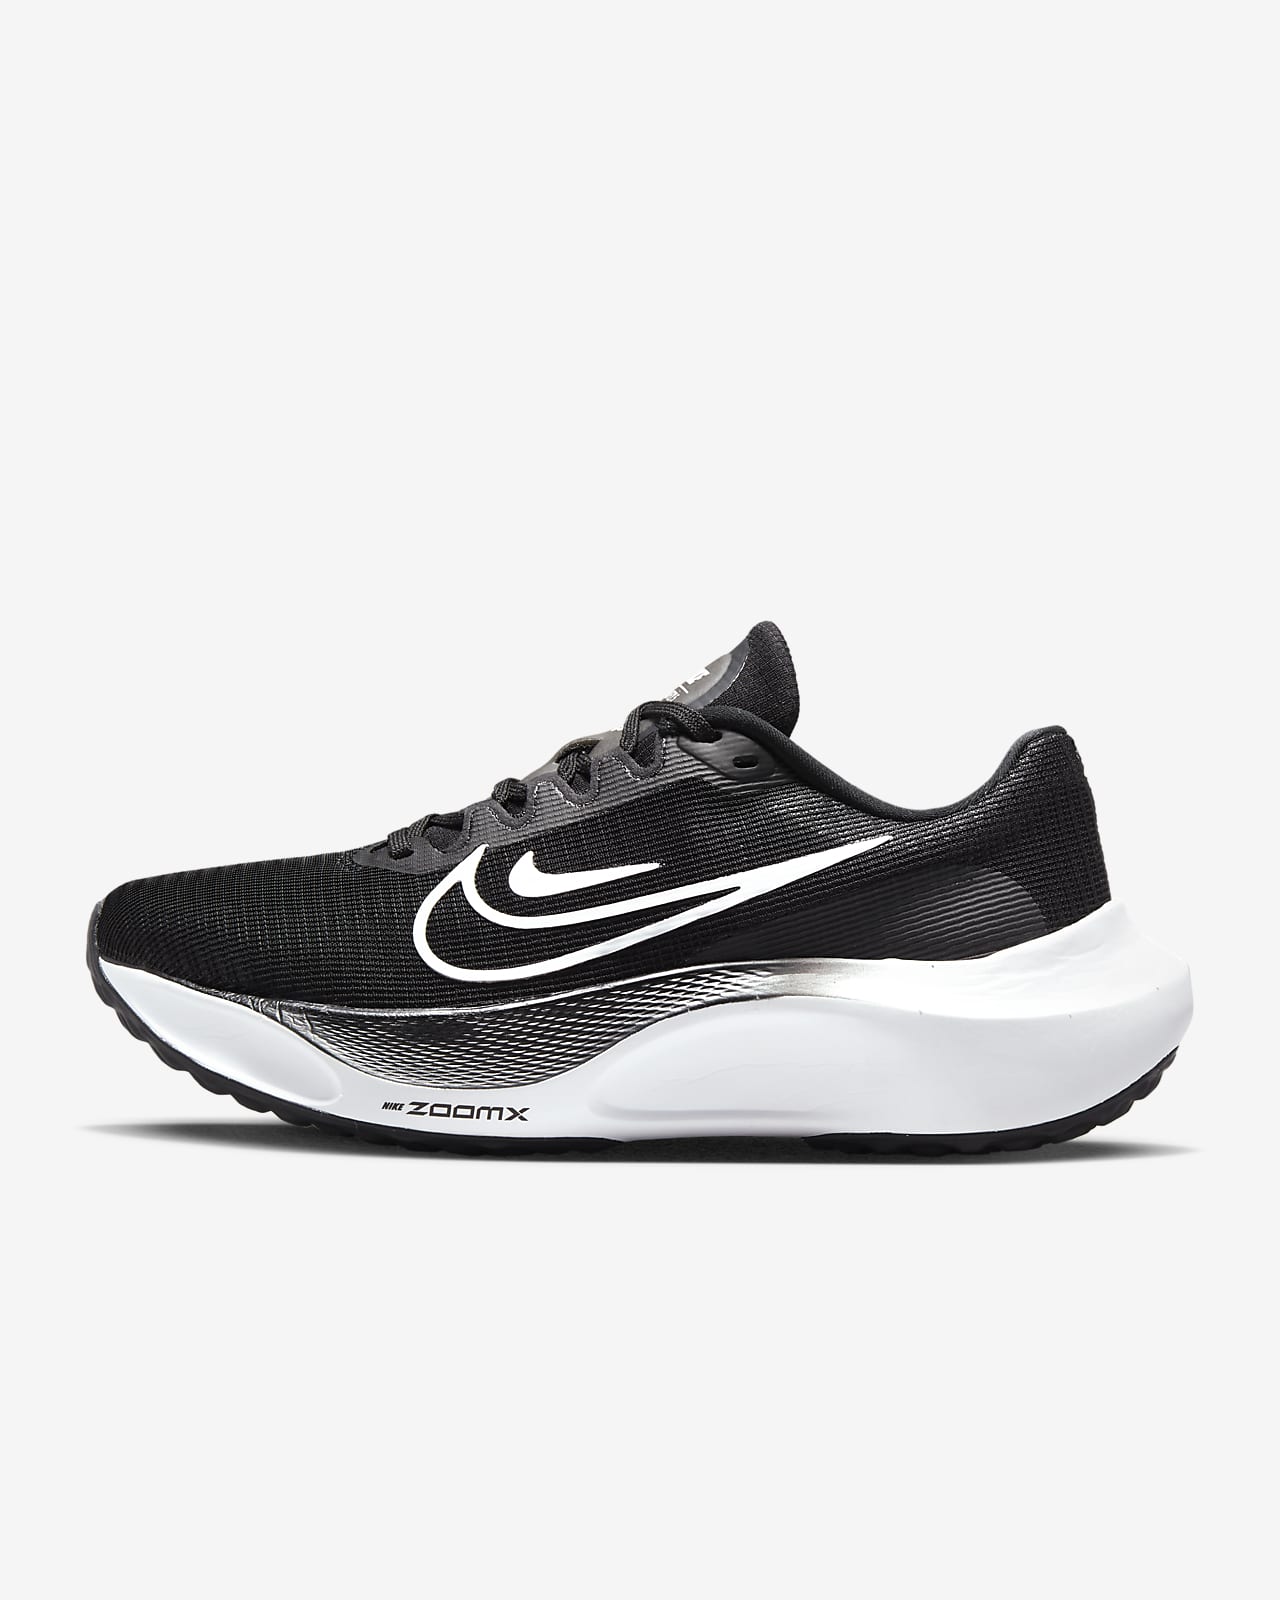 24cm WMNS ZOOM FLY 5